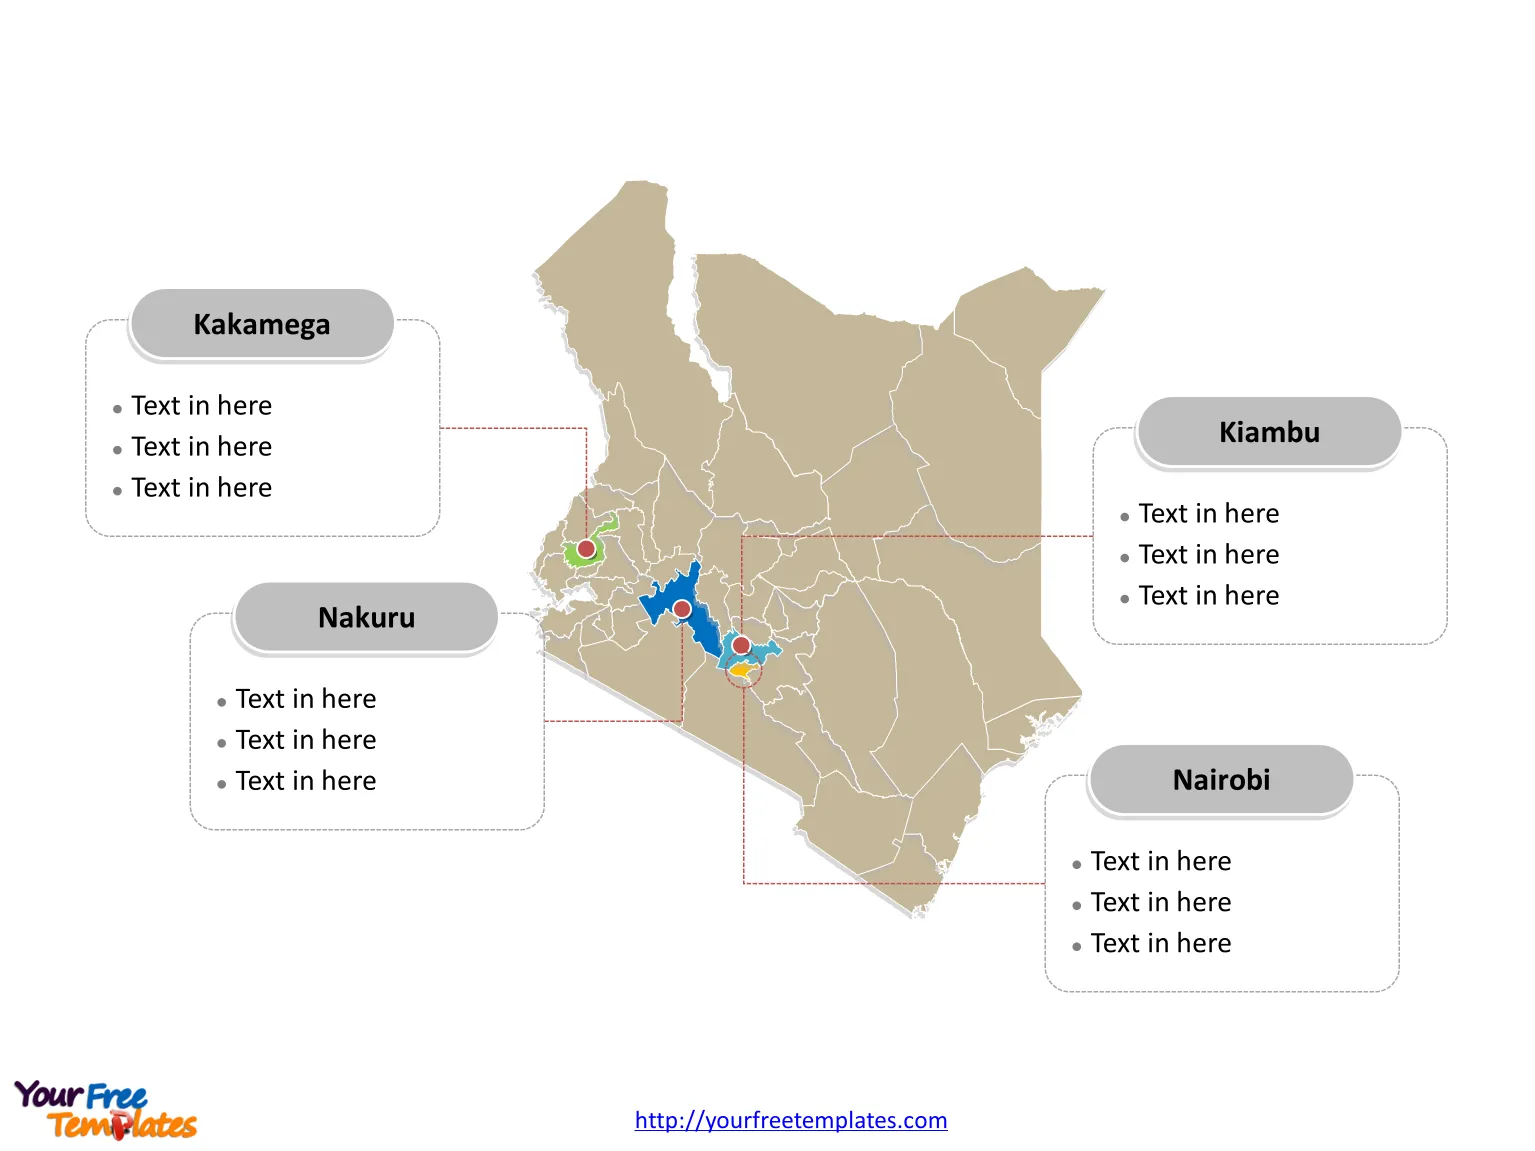 Kenya Outline map labeled with cities